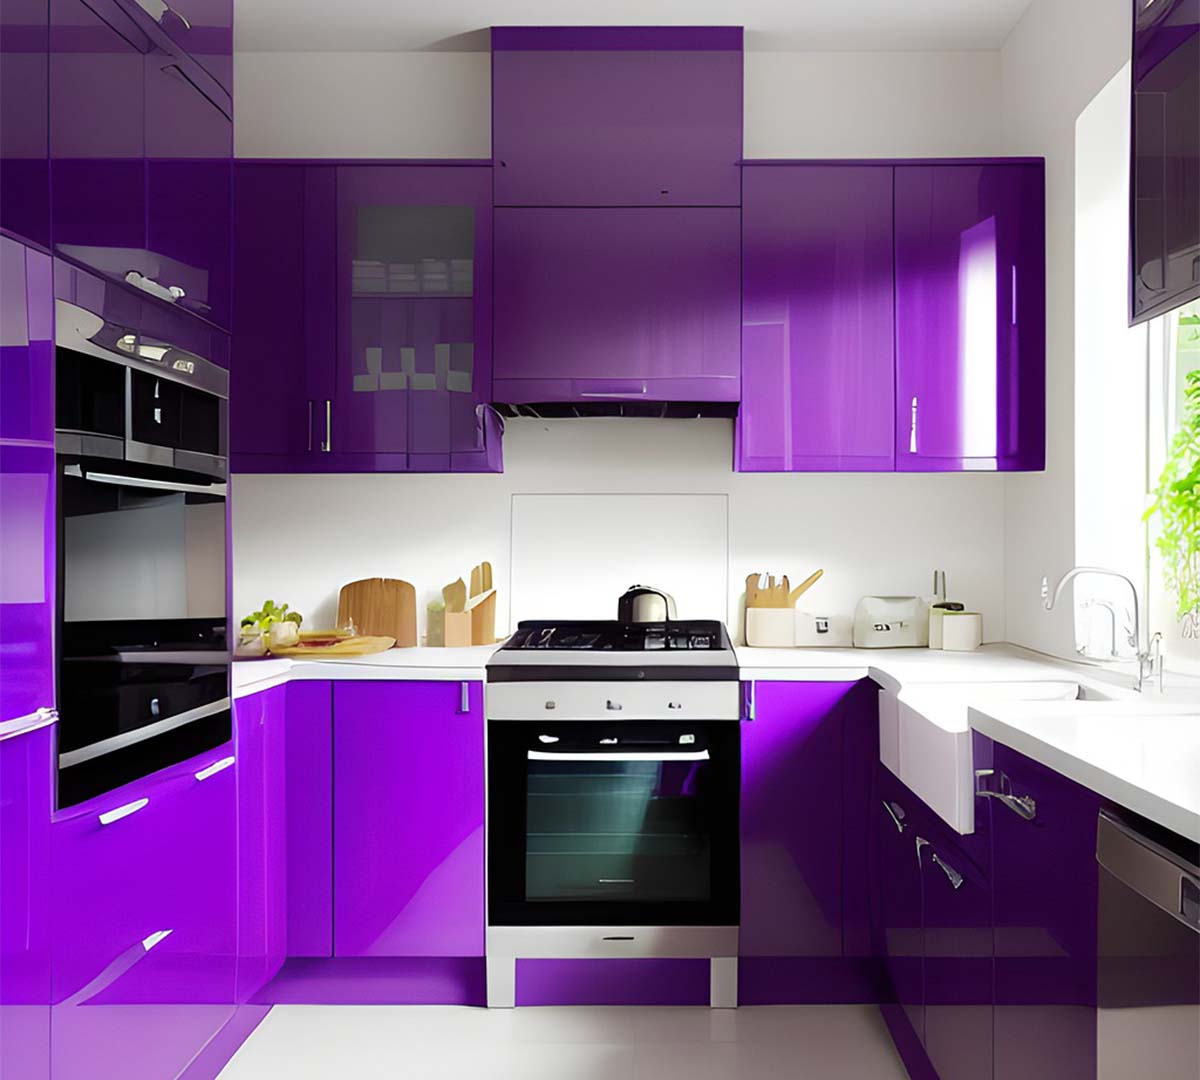 Modern kitchen interior design with purple cabinets and white countertops